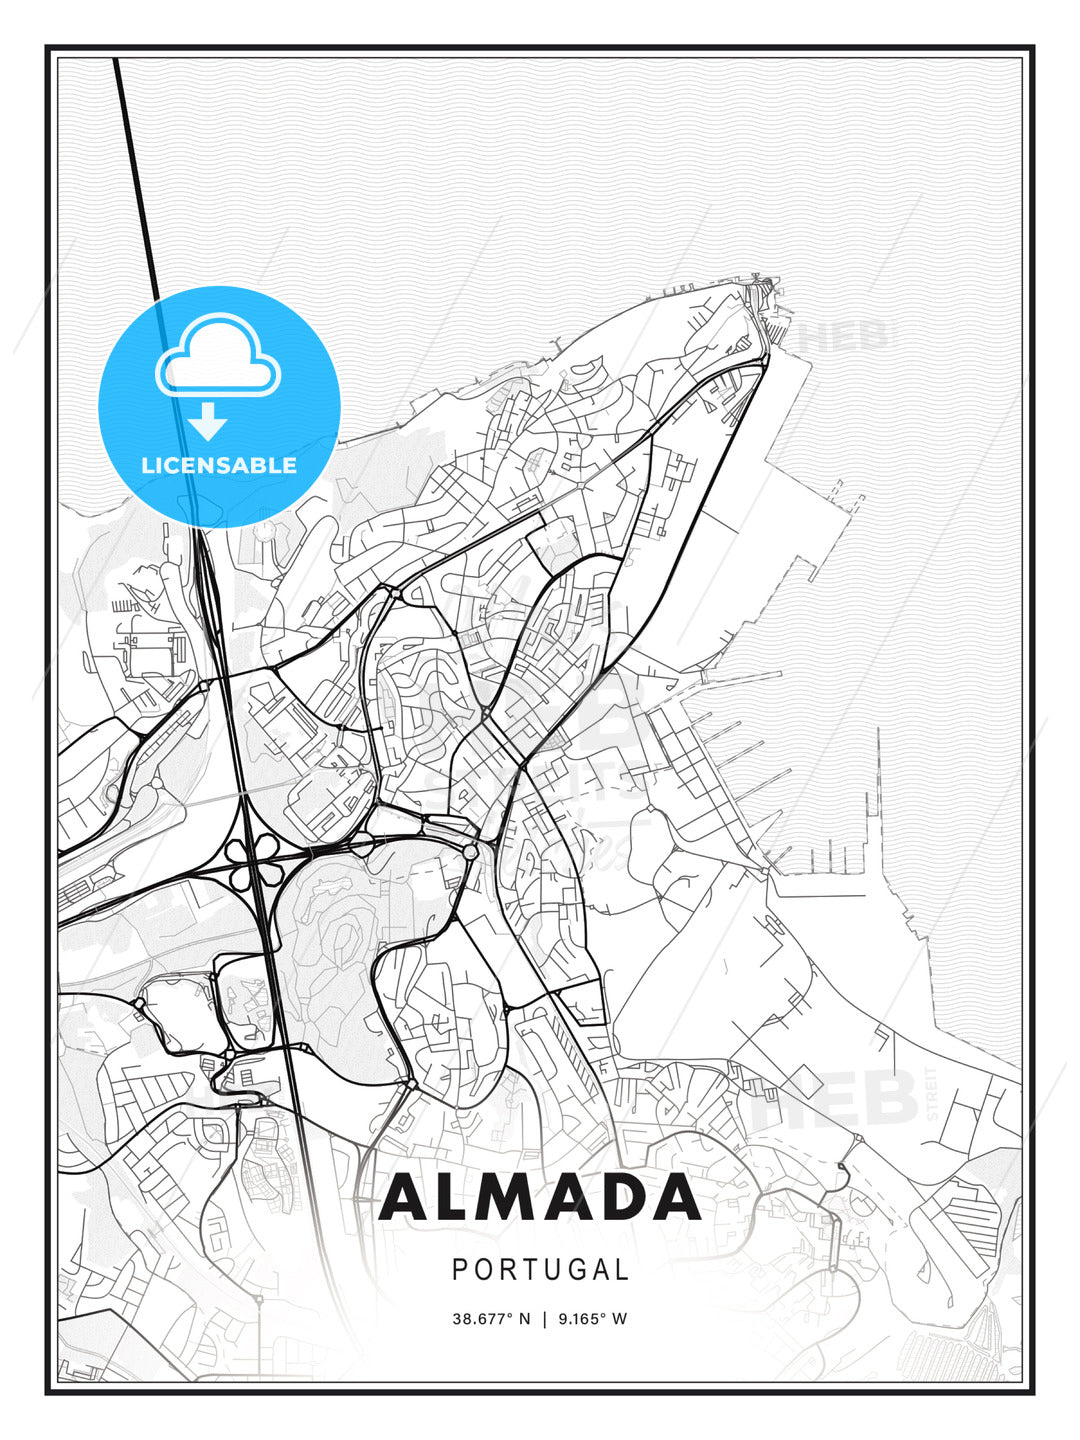 Almada, Portugal, Modern Print Template in Various Formats - HEBSTREITS Sketches